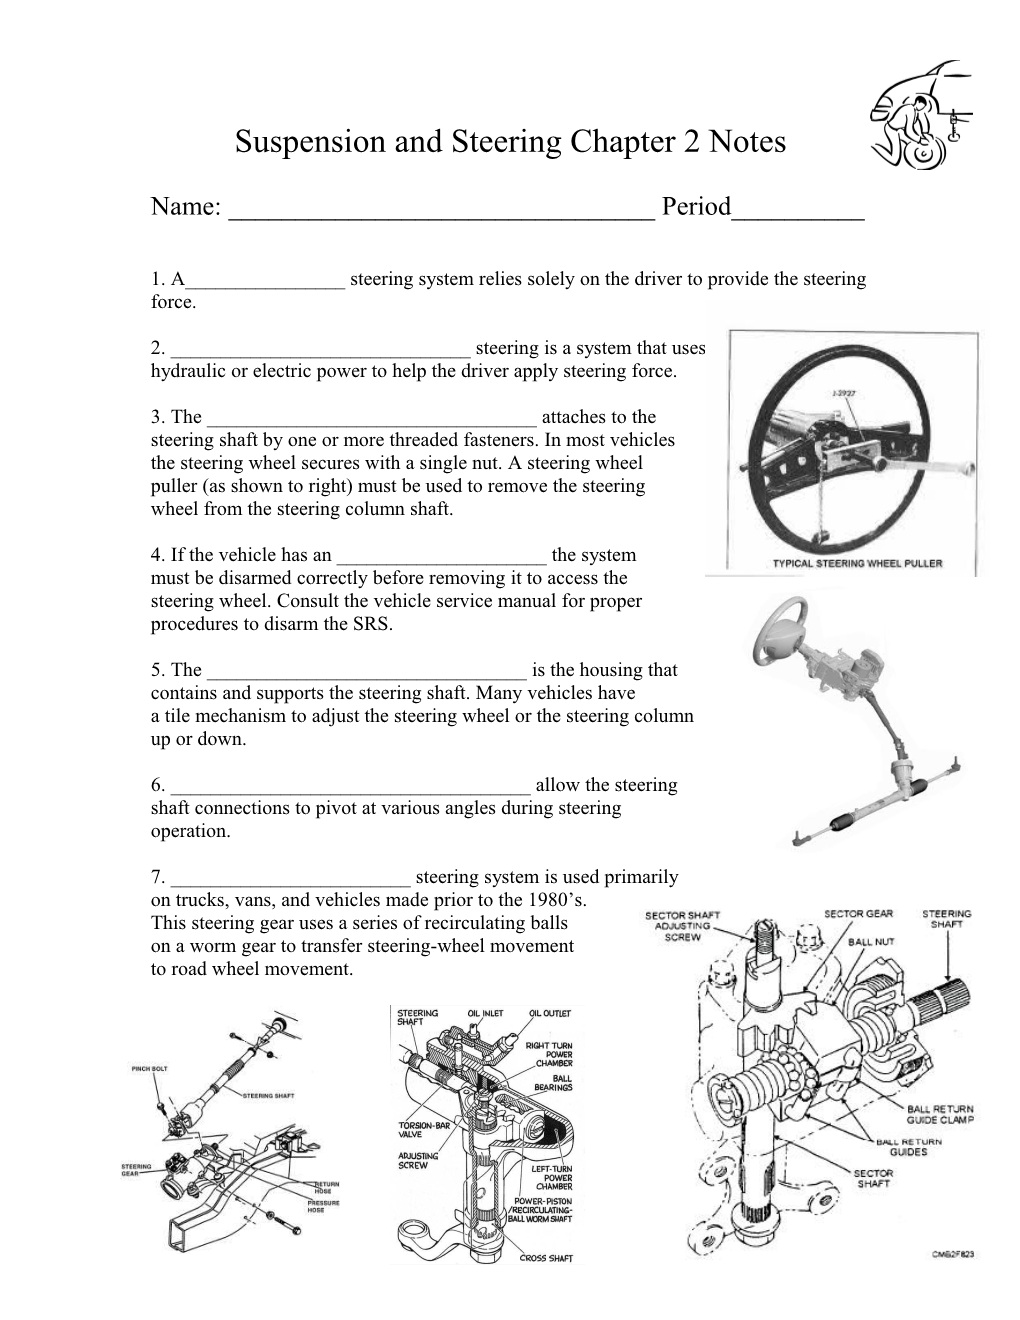 Suspension and Steering Chapter 2 Notes